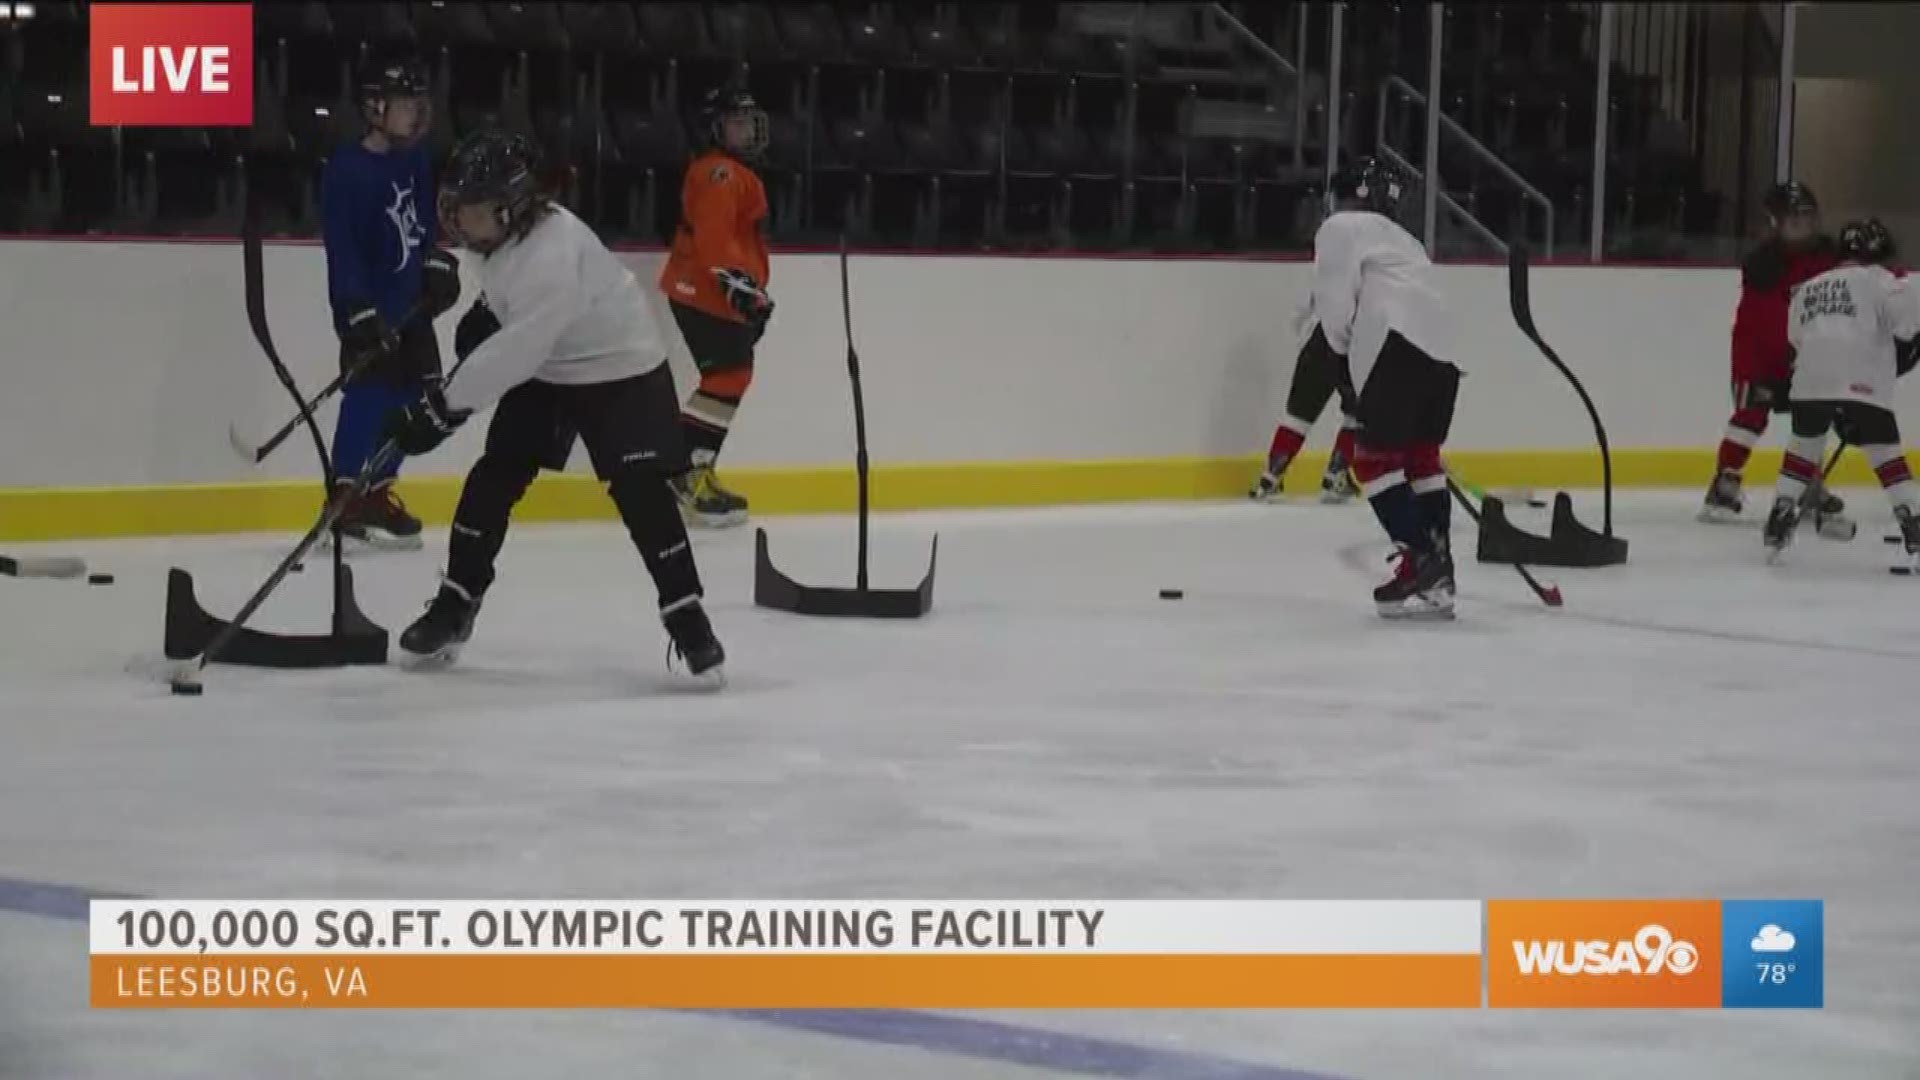 From hockey to figure skating, the ION International Training Center is a brand new 100,000 sq ft training facility in Leesburg. The goal of it's owner is to help train more Olympians in our area.